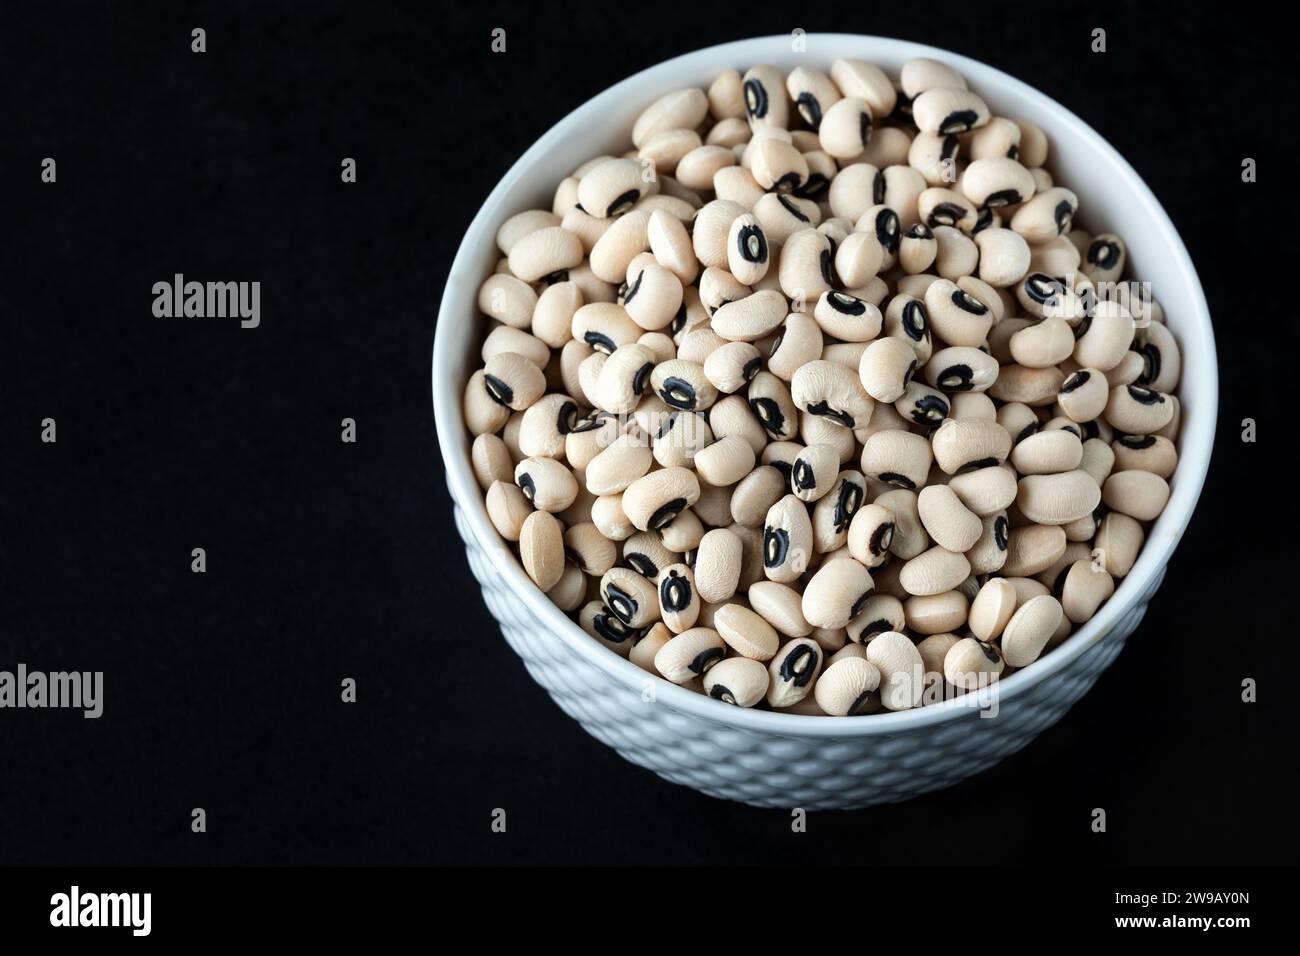 Black eye peas in a white bowl on black background, top view. Black-eyed beans, also known as cowpeas. Stock Photo